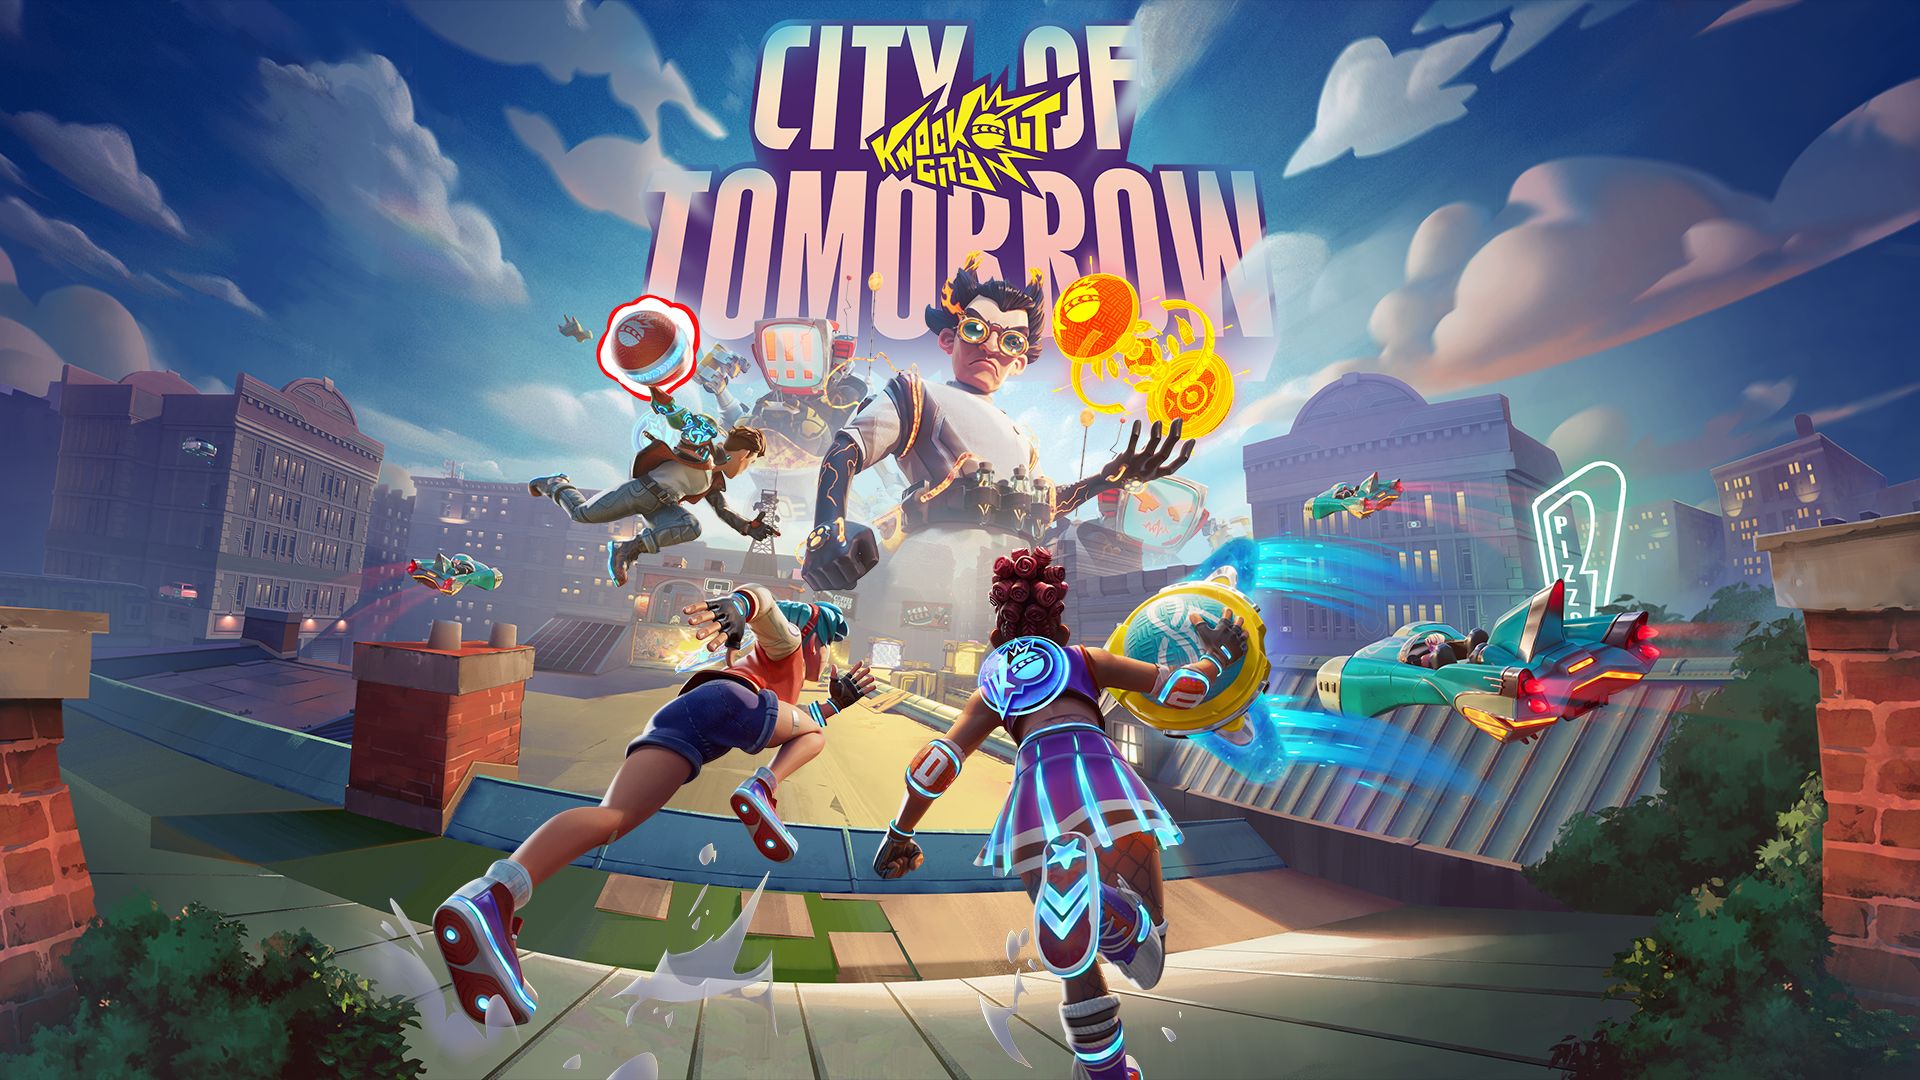 Welcome to the Future of Knockout City in Season 6: City of